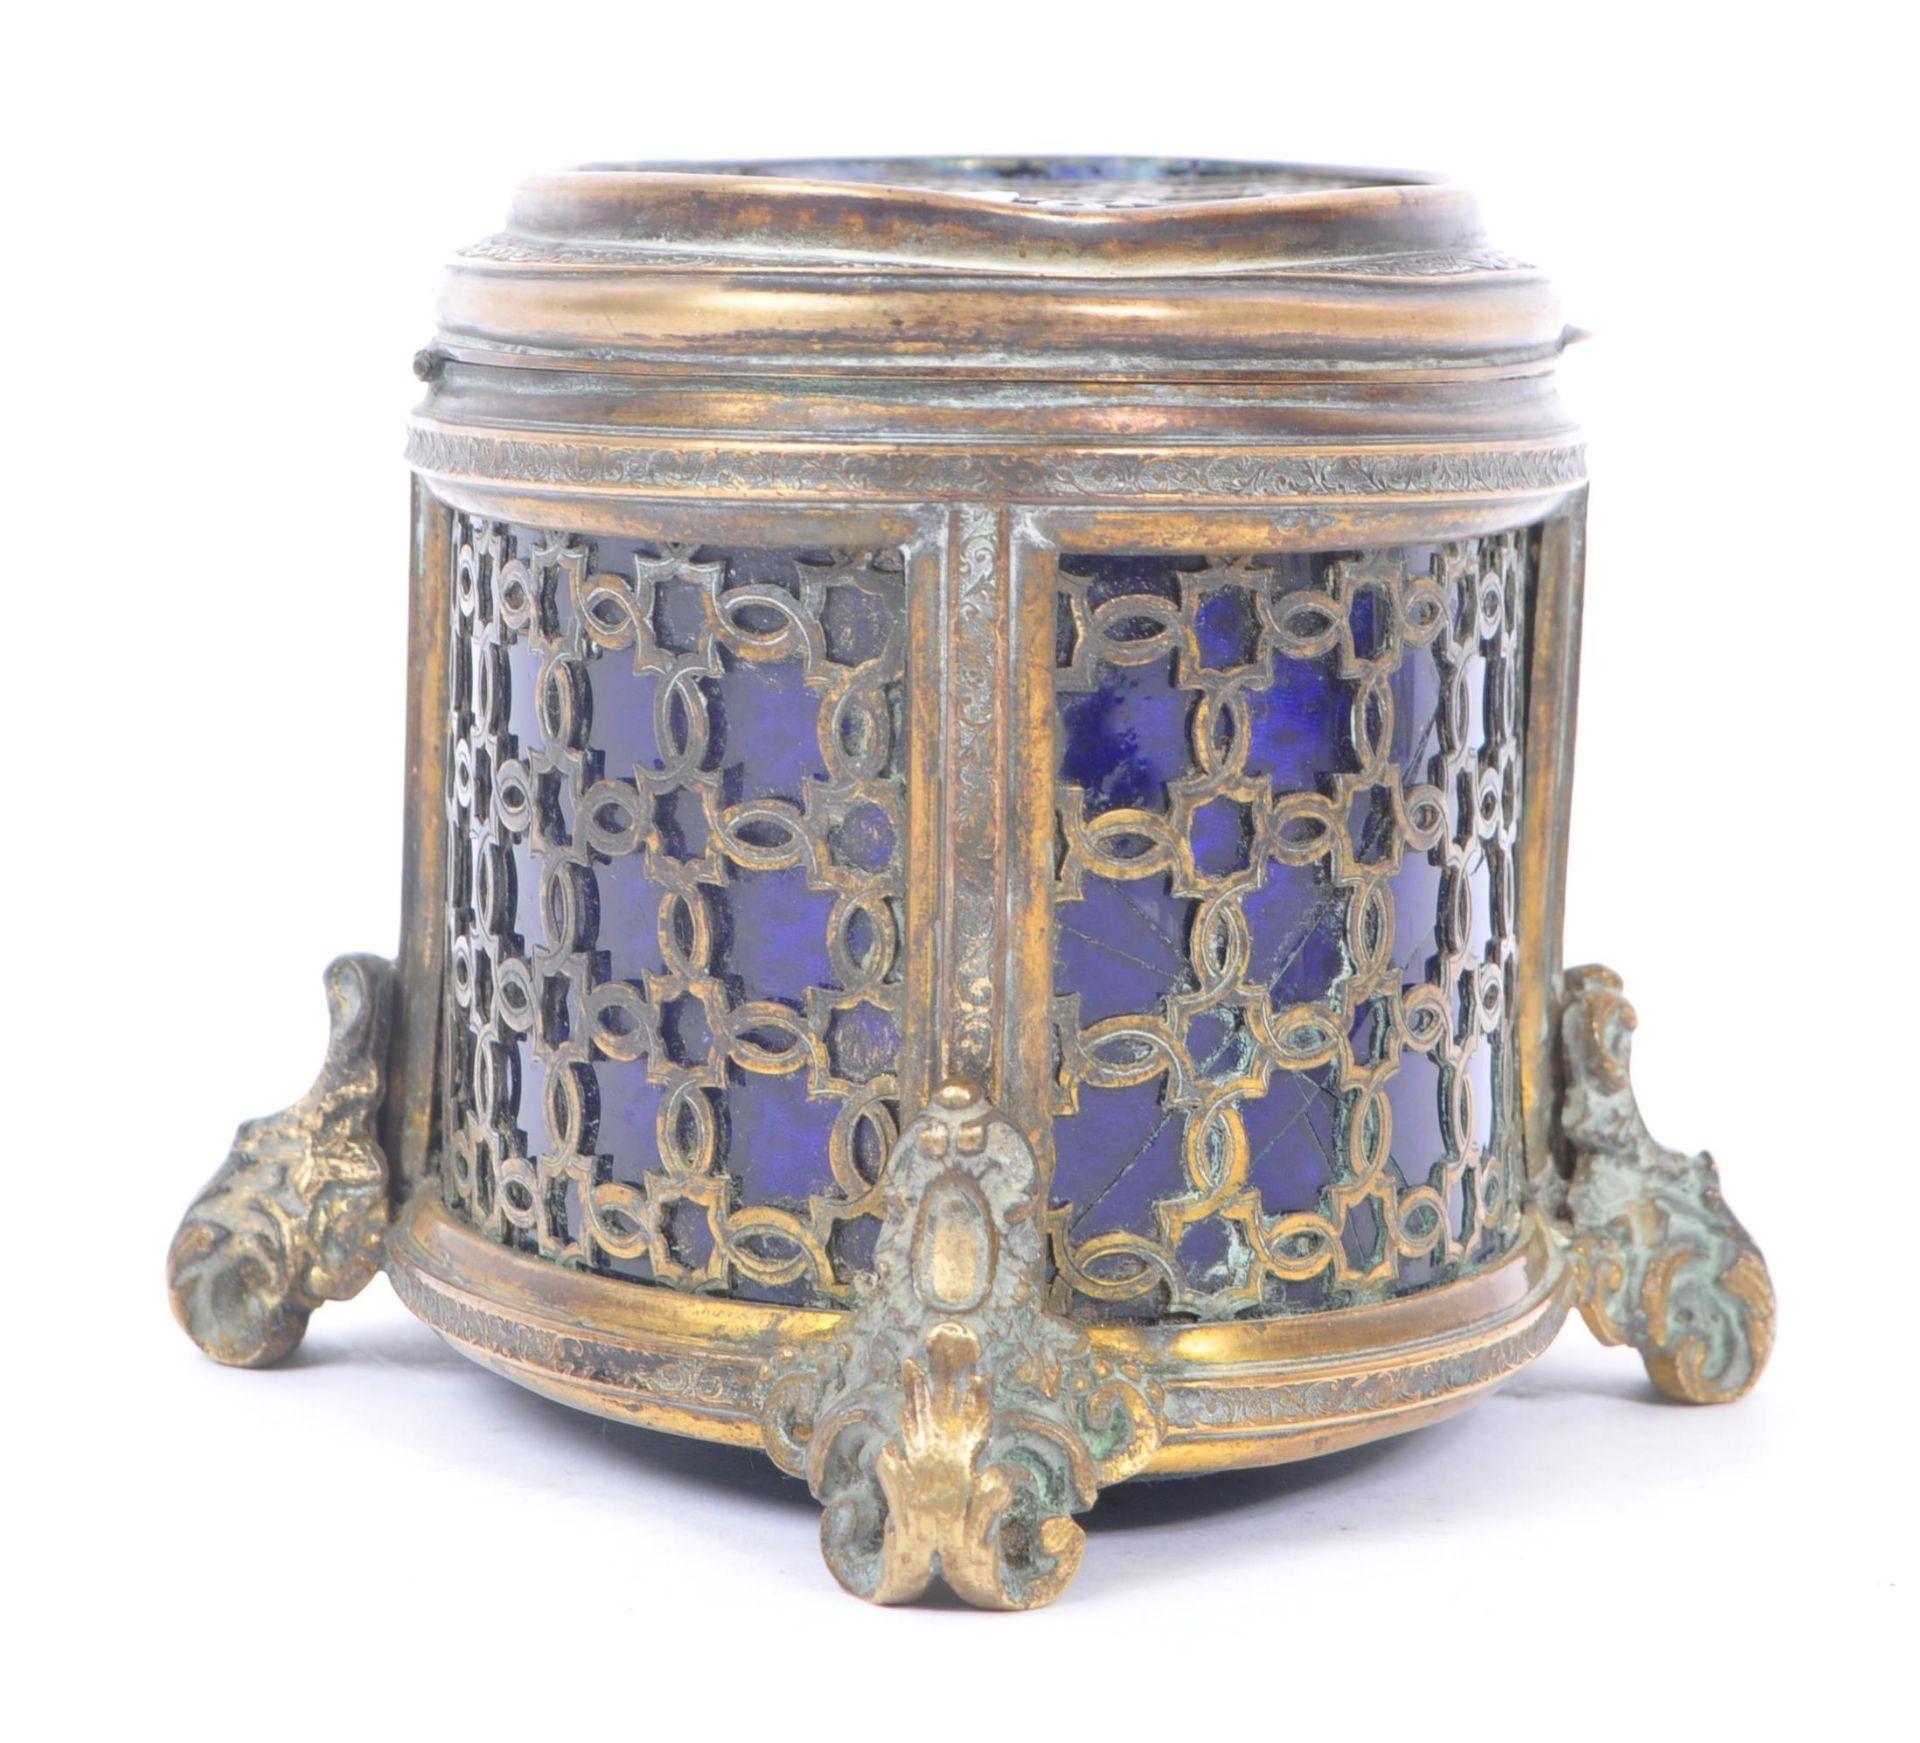 EARLY 20TH CENTURY BRASS AND BLUE GLASS TRINKET BOX - Image 2 of 6